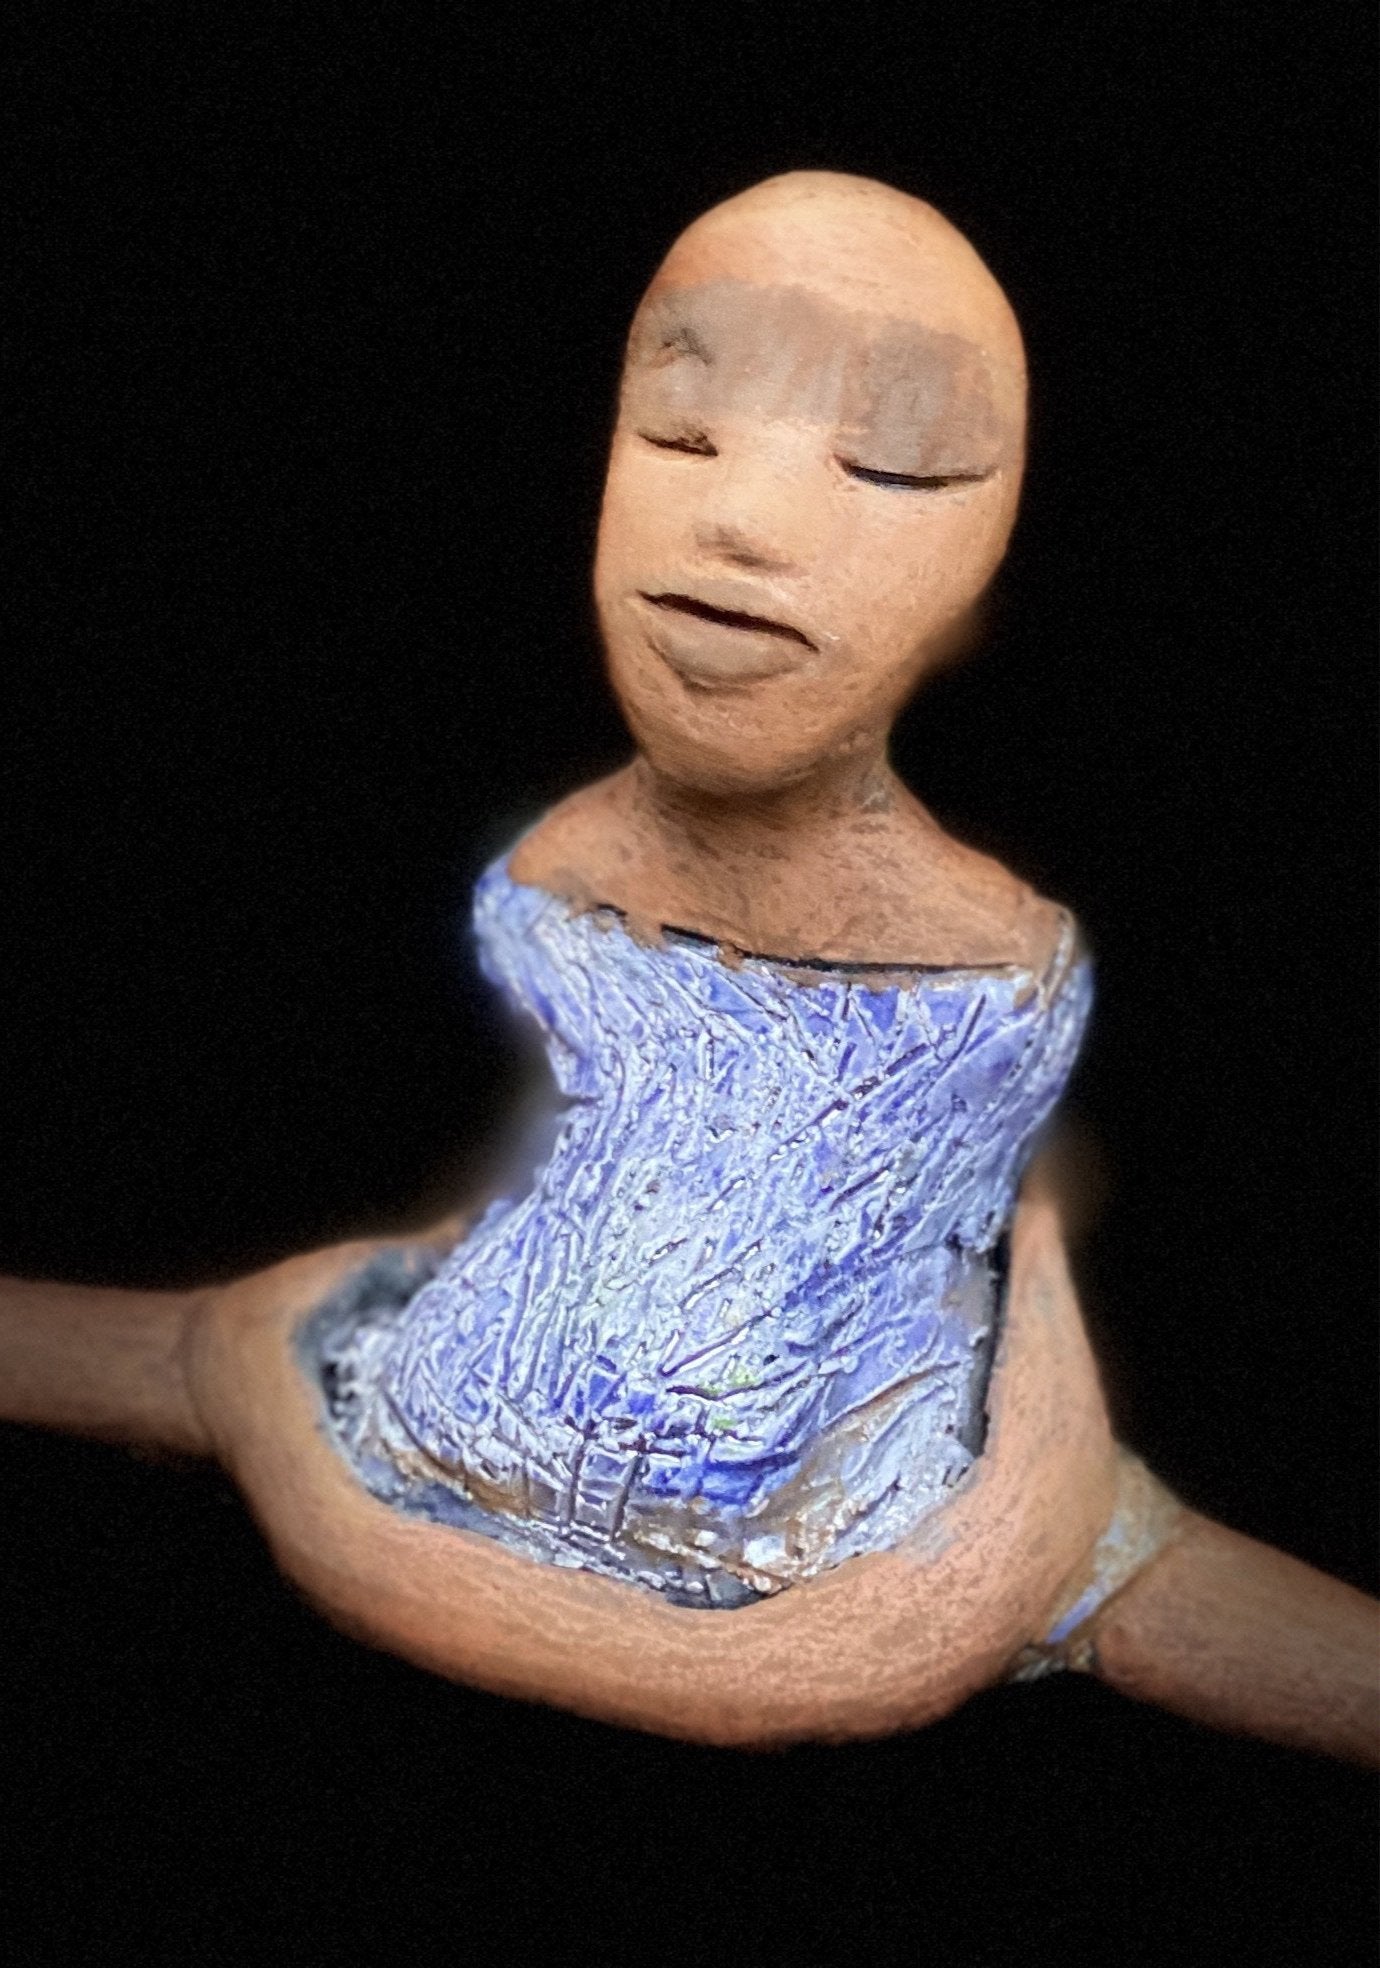 "Vida sits with her mind on peace and meditation". Vida sits 5" x 6" x 3" and weighs 10 ozs. She is in a comfortable yoga pose. Vida has a lovely two tone honey brown complexion.  She is without hair! Vida has a textured light blue with matching blue shoes.